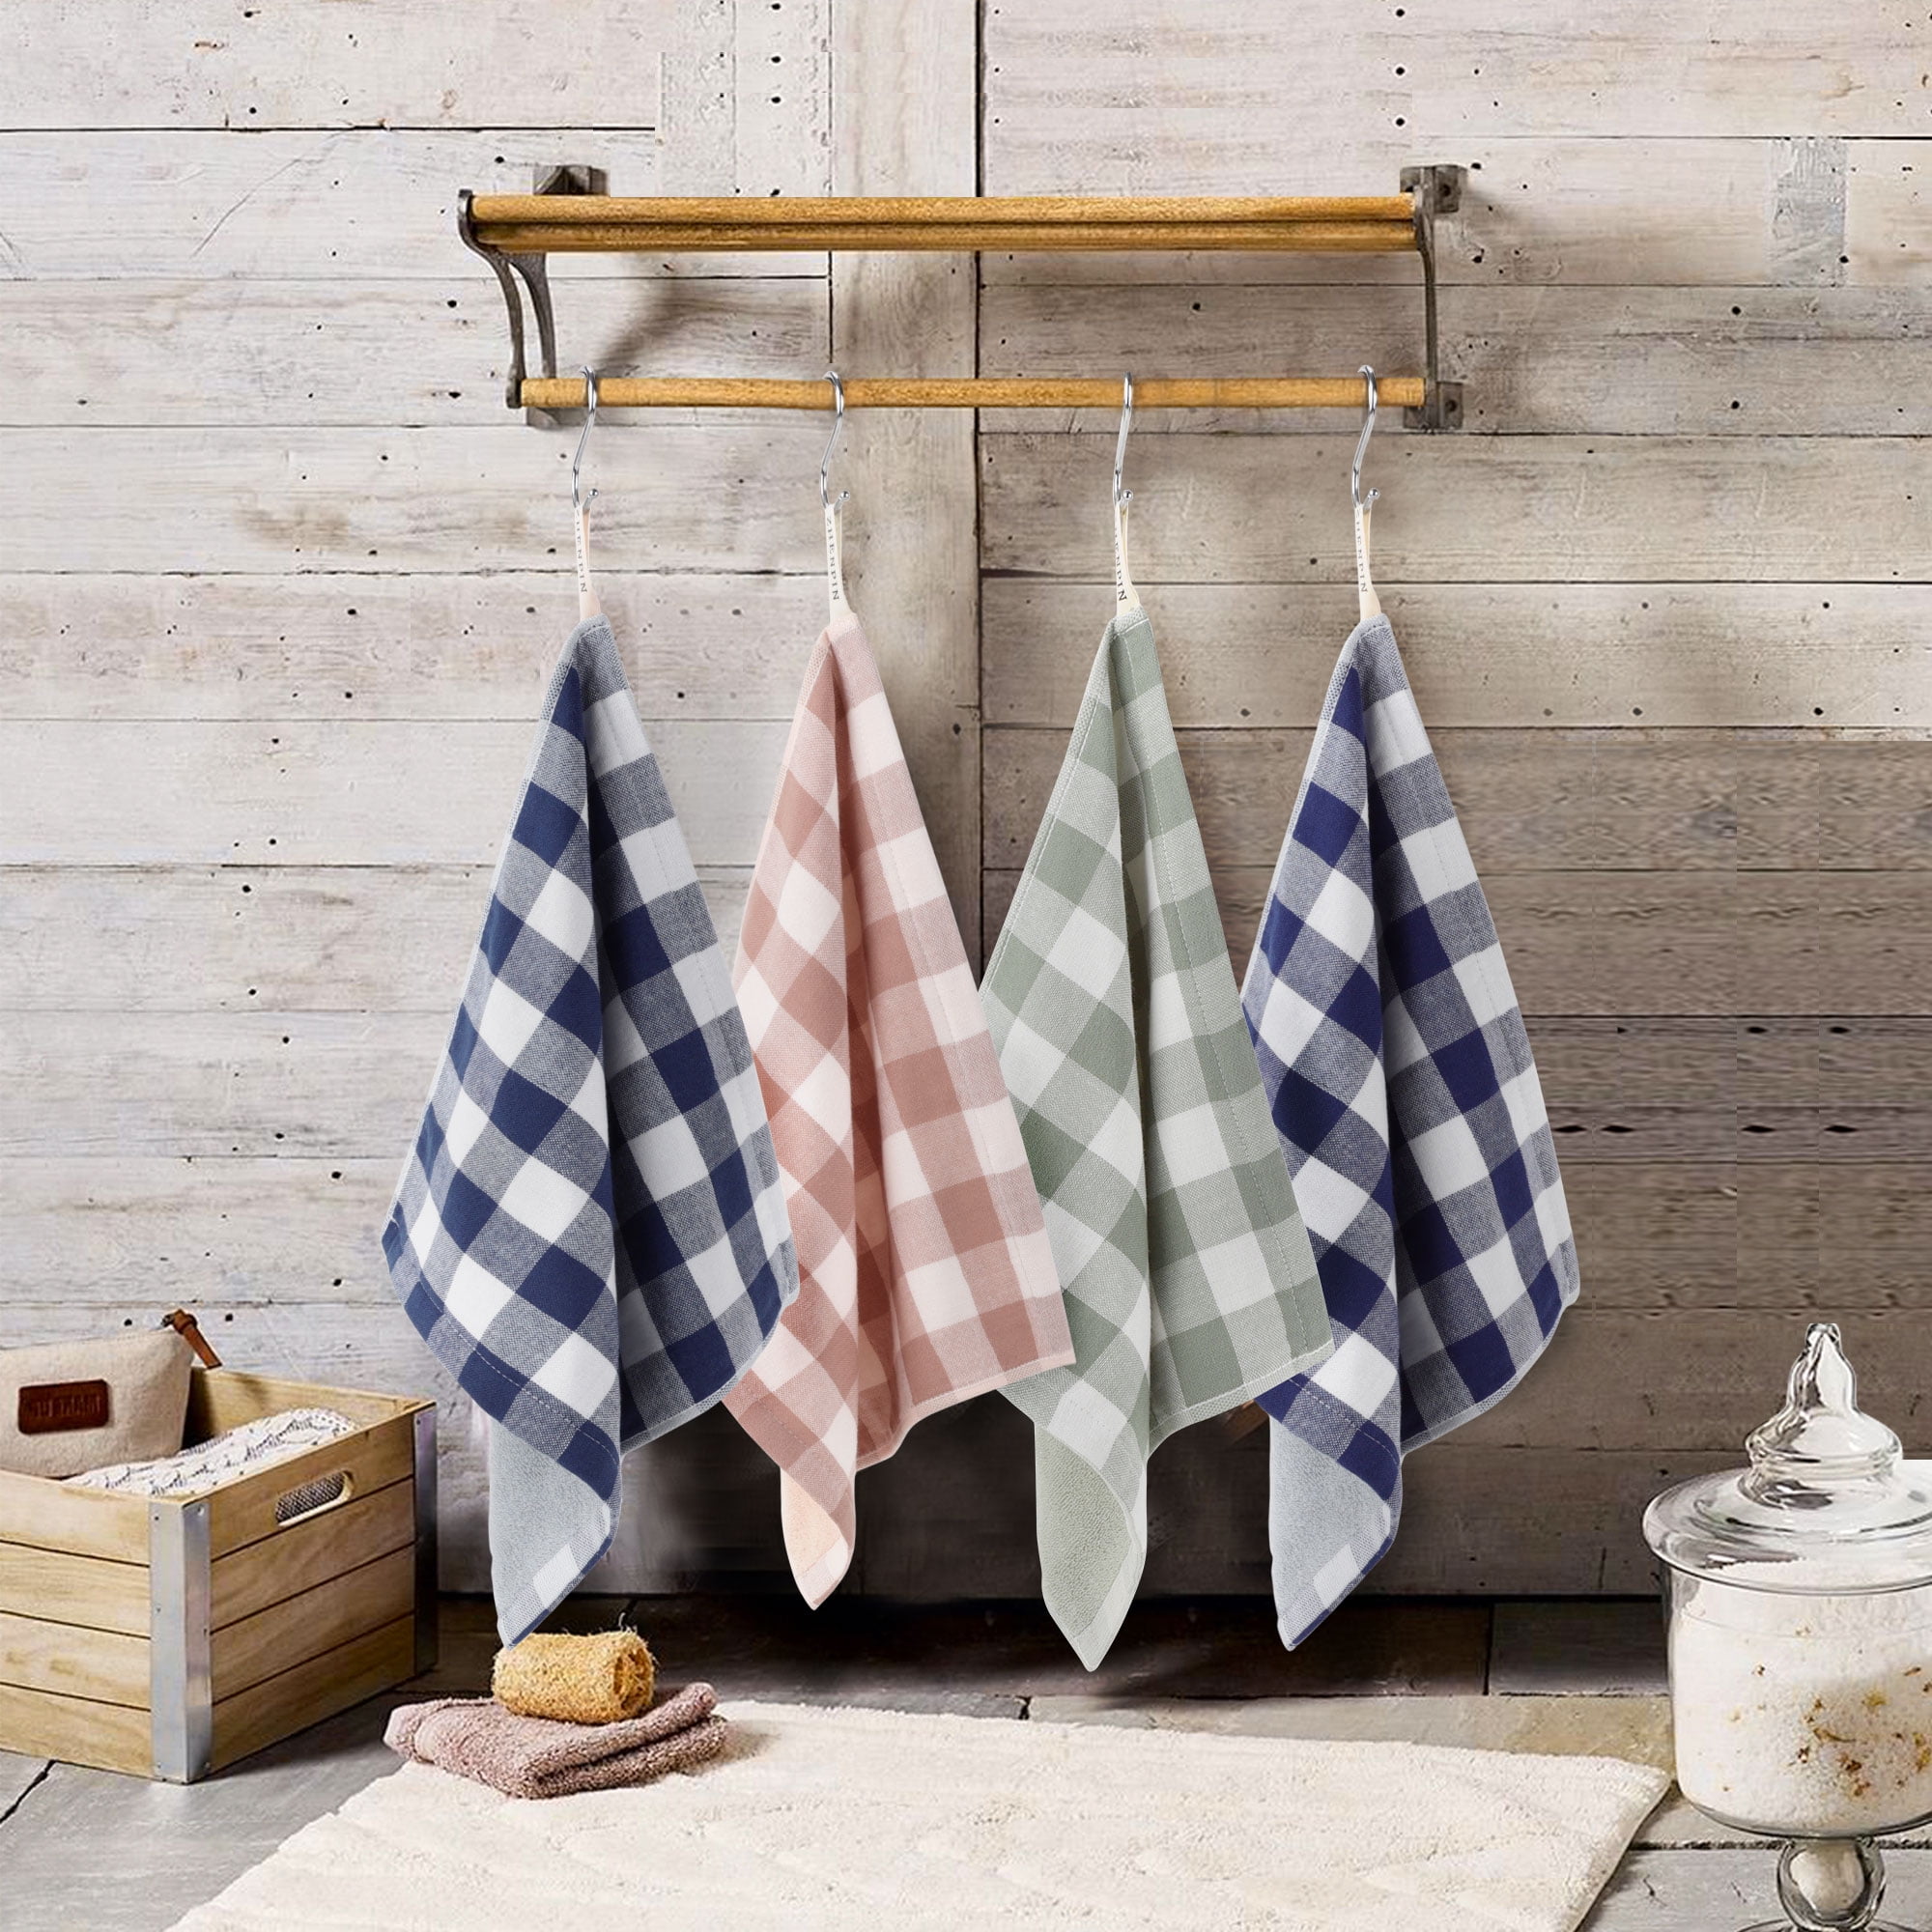 PiccoCasa 100% Cotton Terry Kitchen Towels Set of 6 Plaid Pattern (13 x 29  Inch) Soft Absorbent Drying Dish Towels for Kitchen Cooking - Blue